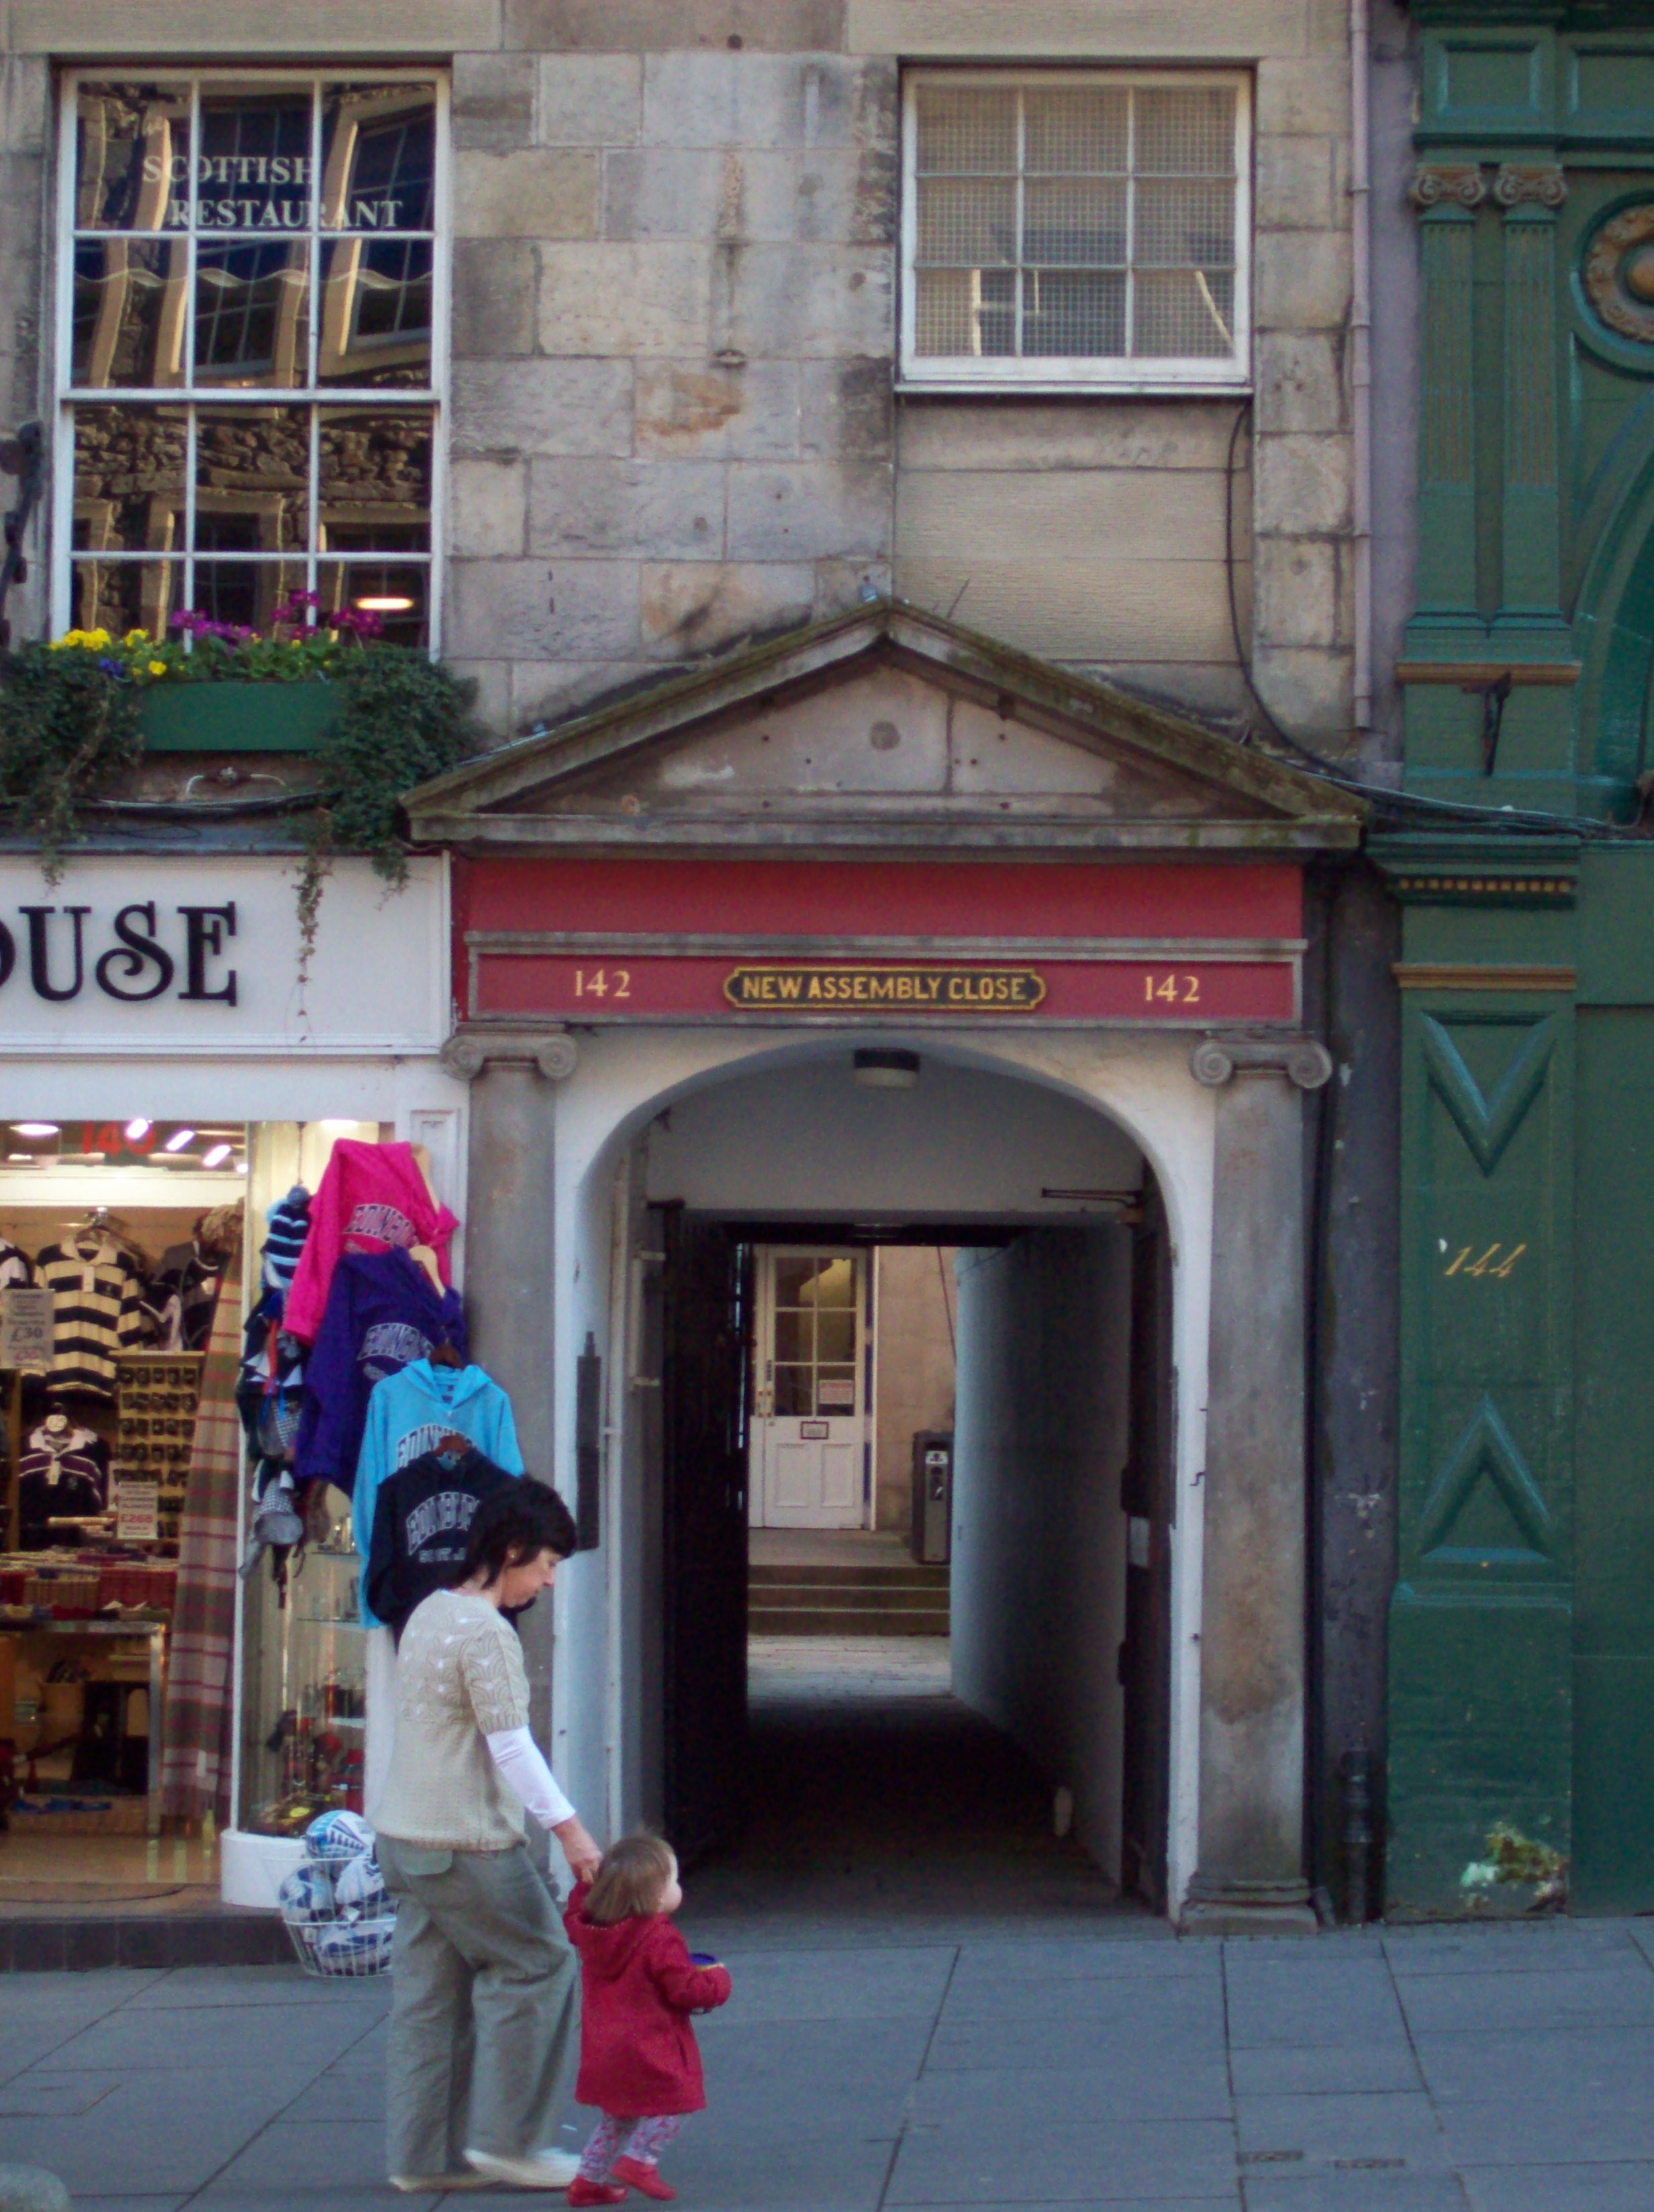 a white archway flanked by grey stone classical pillars, opening between shops and into a tunnel through the building, with a red strip above it bearing the label \'NEW ASSEMBLY CLOSE\' and a triangular stone architrave above that: an open courtyard and a white dorway with steps up to it can be glimped through the tunnel